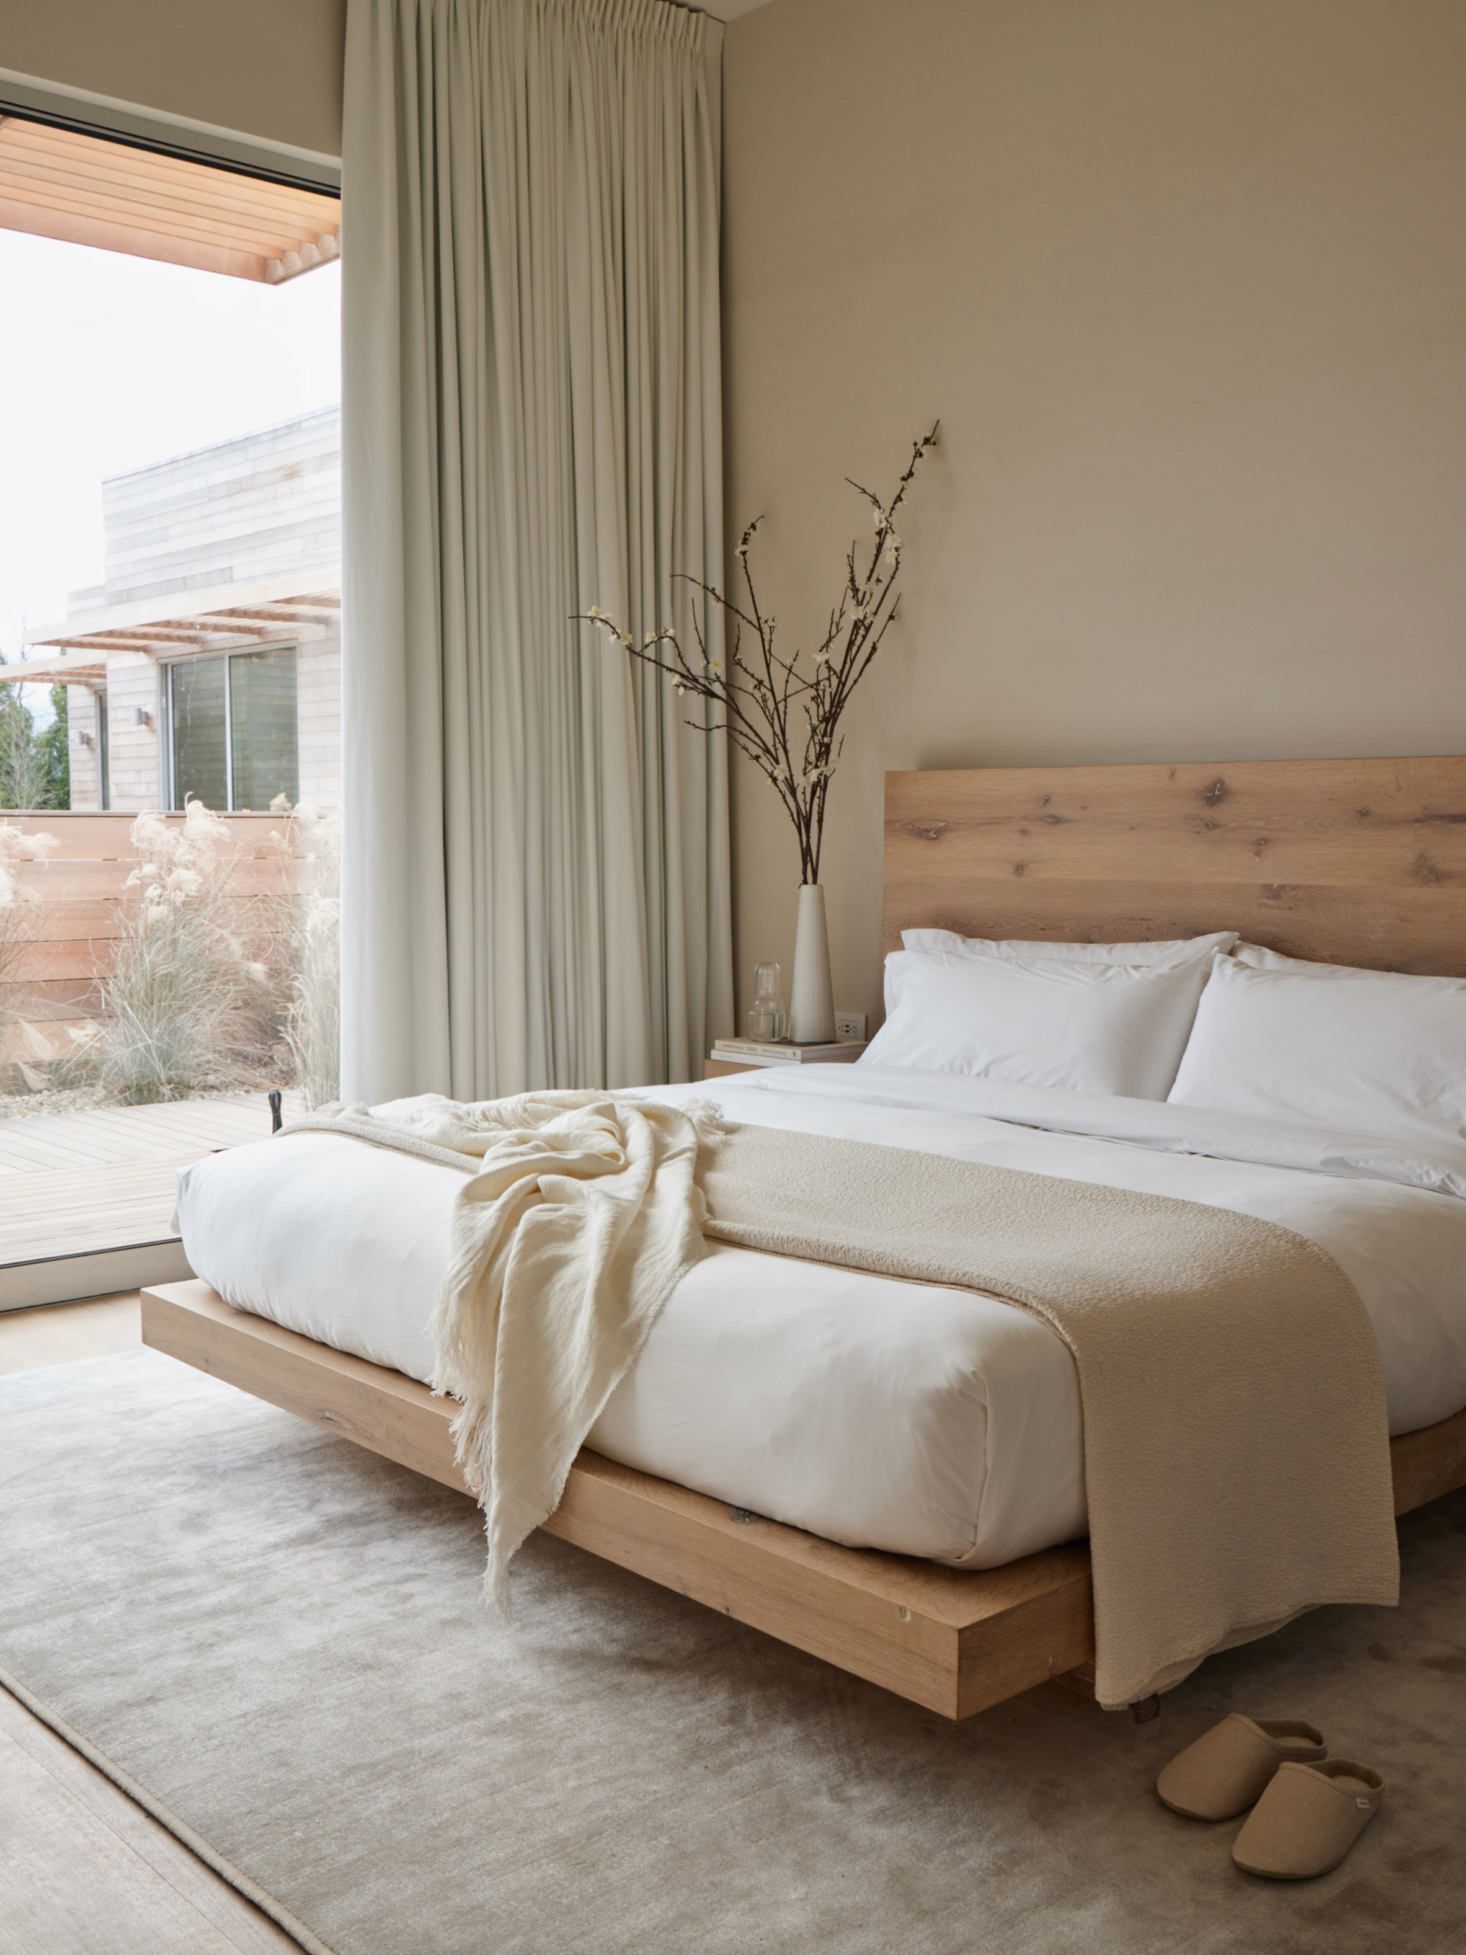 Bedroom Decor : Top Tips for Stylish Bedroom Decor That Will Transform Your Space